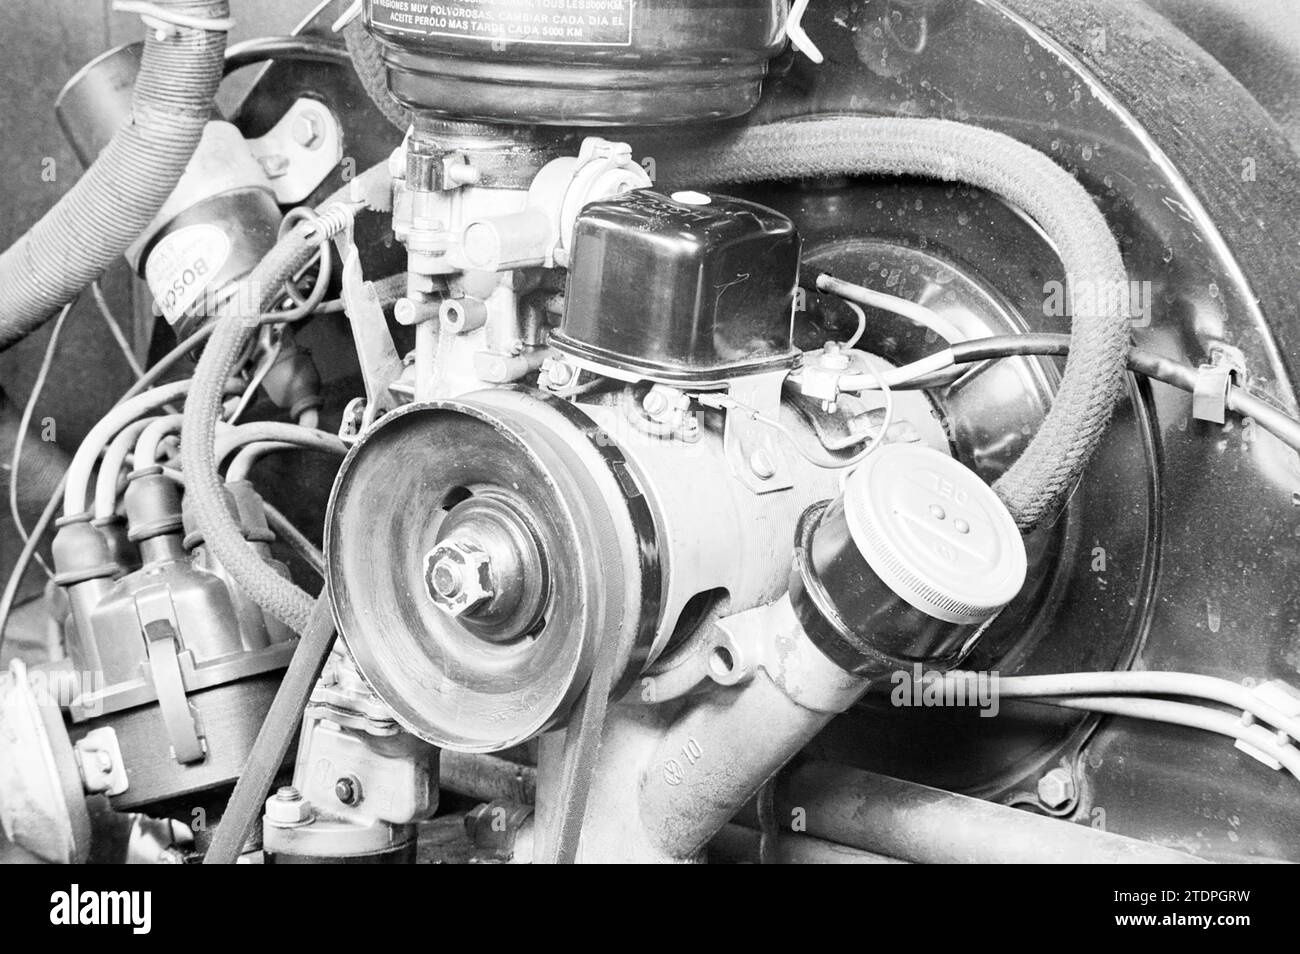 V.W. car parts for instruction book, Motors, motorcycle race, 23-11-1963, Whizgle News from the Past, Tailored for the Future. Explore historical narratives, Dutch The Netherlands agency image with a modern perspective, bridging the gap between yesterday's events and tomorrow's insights. A timeless journey shaping the stories that shape our future Stock Photo